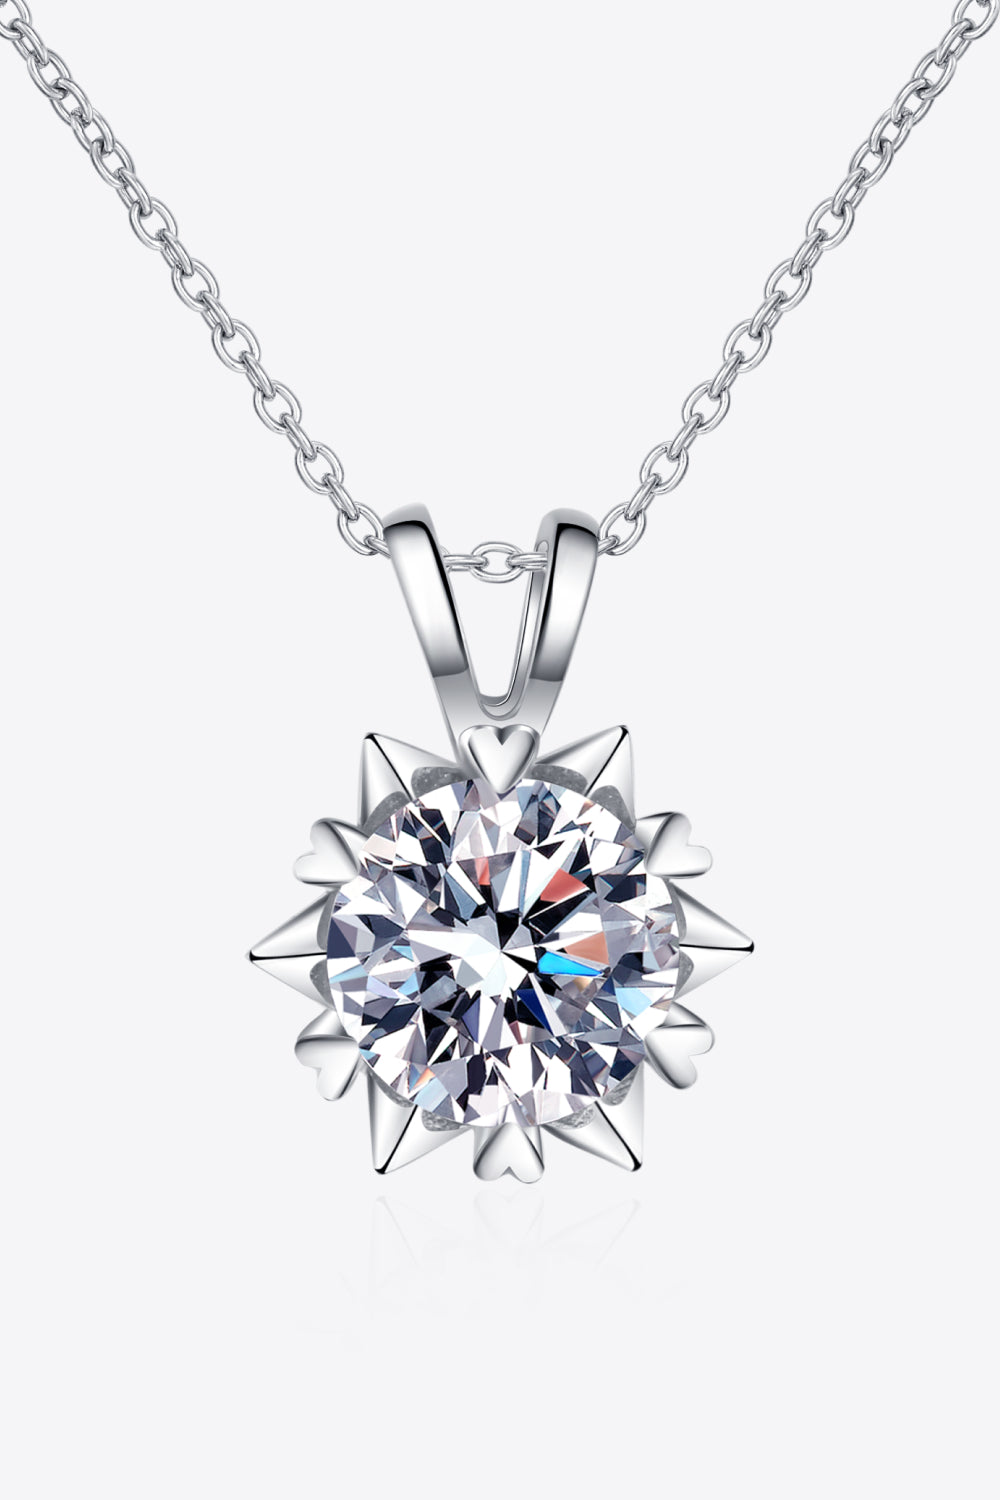 Learning To Love 925 Sterling Silver Moissanite Pendant Necklace-Necklaces-Inspired by Justeen-Women's Clothing Boutique in Chicago, Illinois